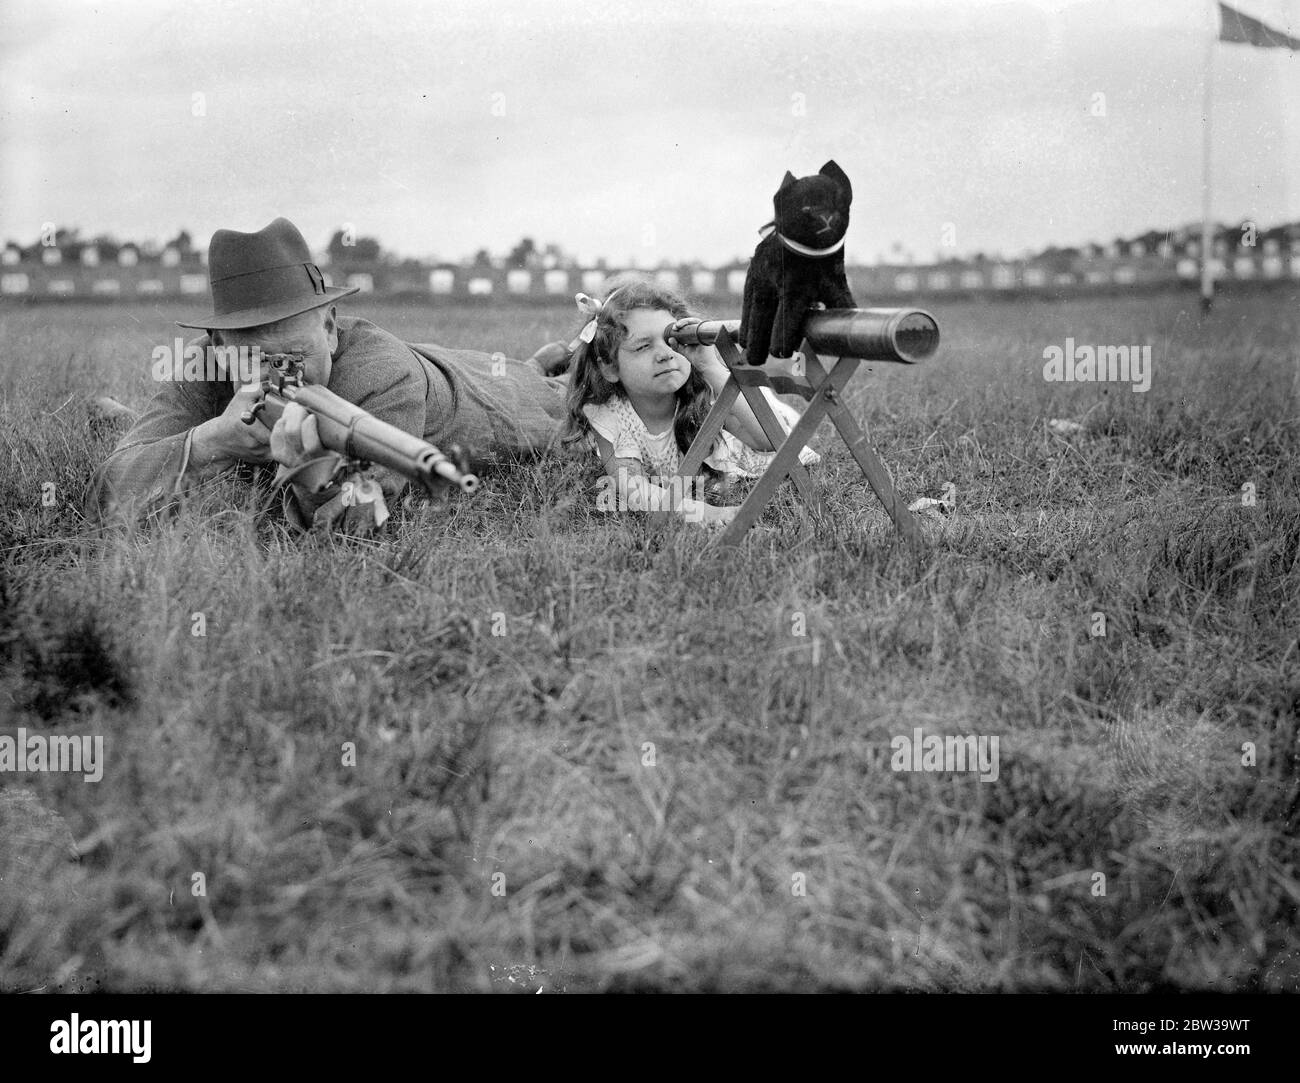 Daughter helps father in King 's Prize competition at Bisley . Mr C H Philpott 's small daughter Denise recording hits for her father . Denise has a black cat mascot for luck . 17 July 1935 Stock Photo